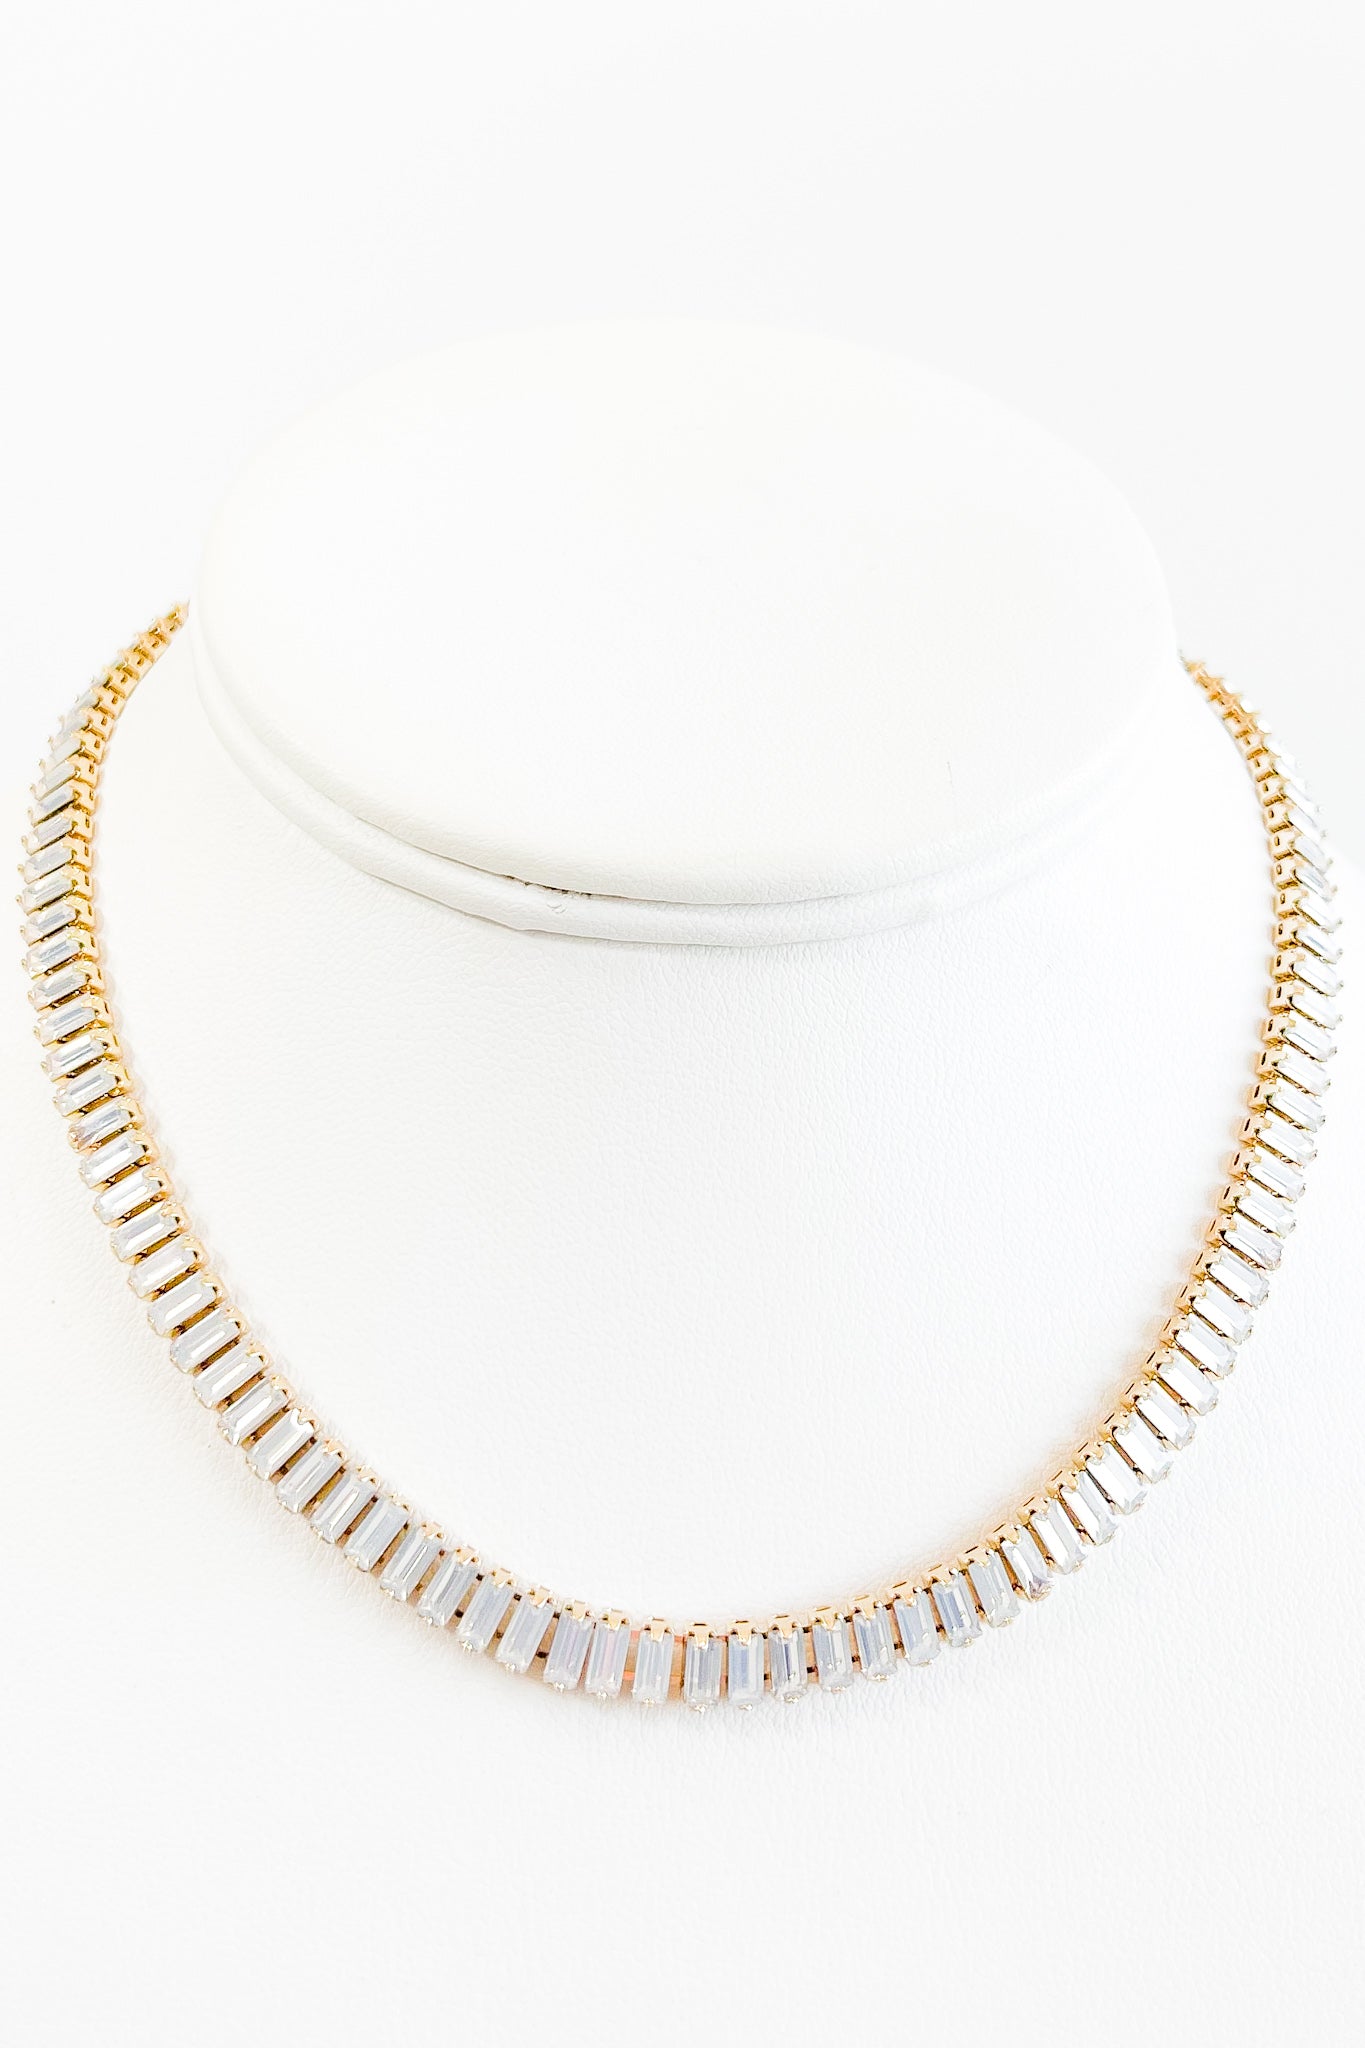 CZ Baguette Necklace - White Opal-230 Jewelry-Golden Stella-Coastal Bloom Boutique, find the trendiest versions of the popular styles and looks Located in Indialantic, FL